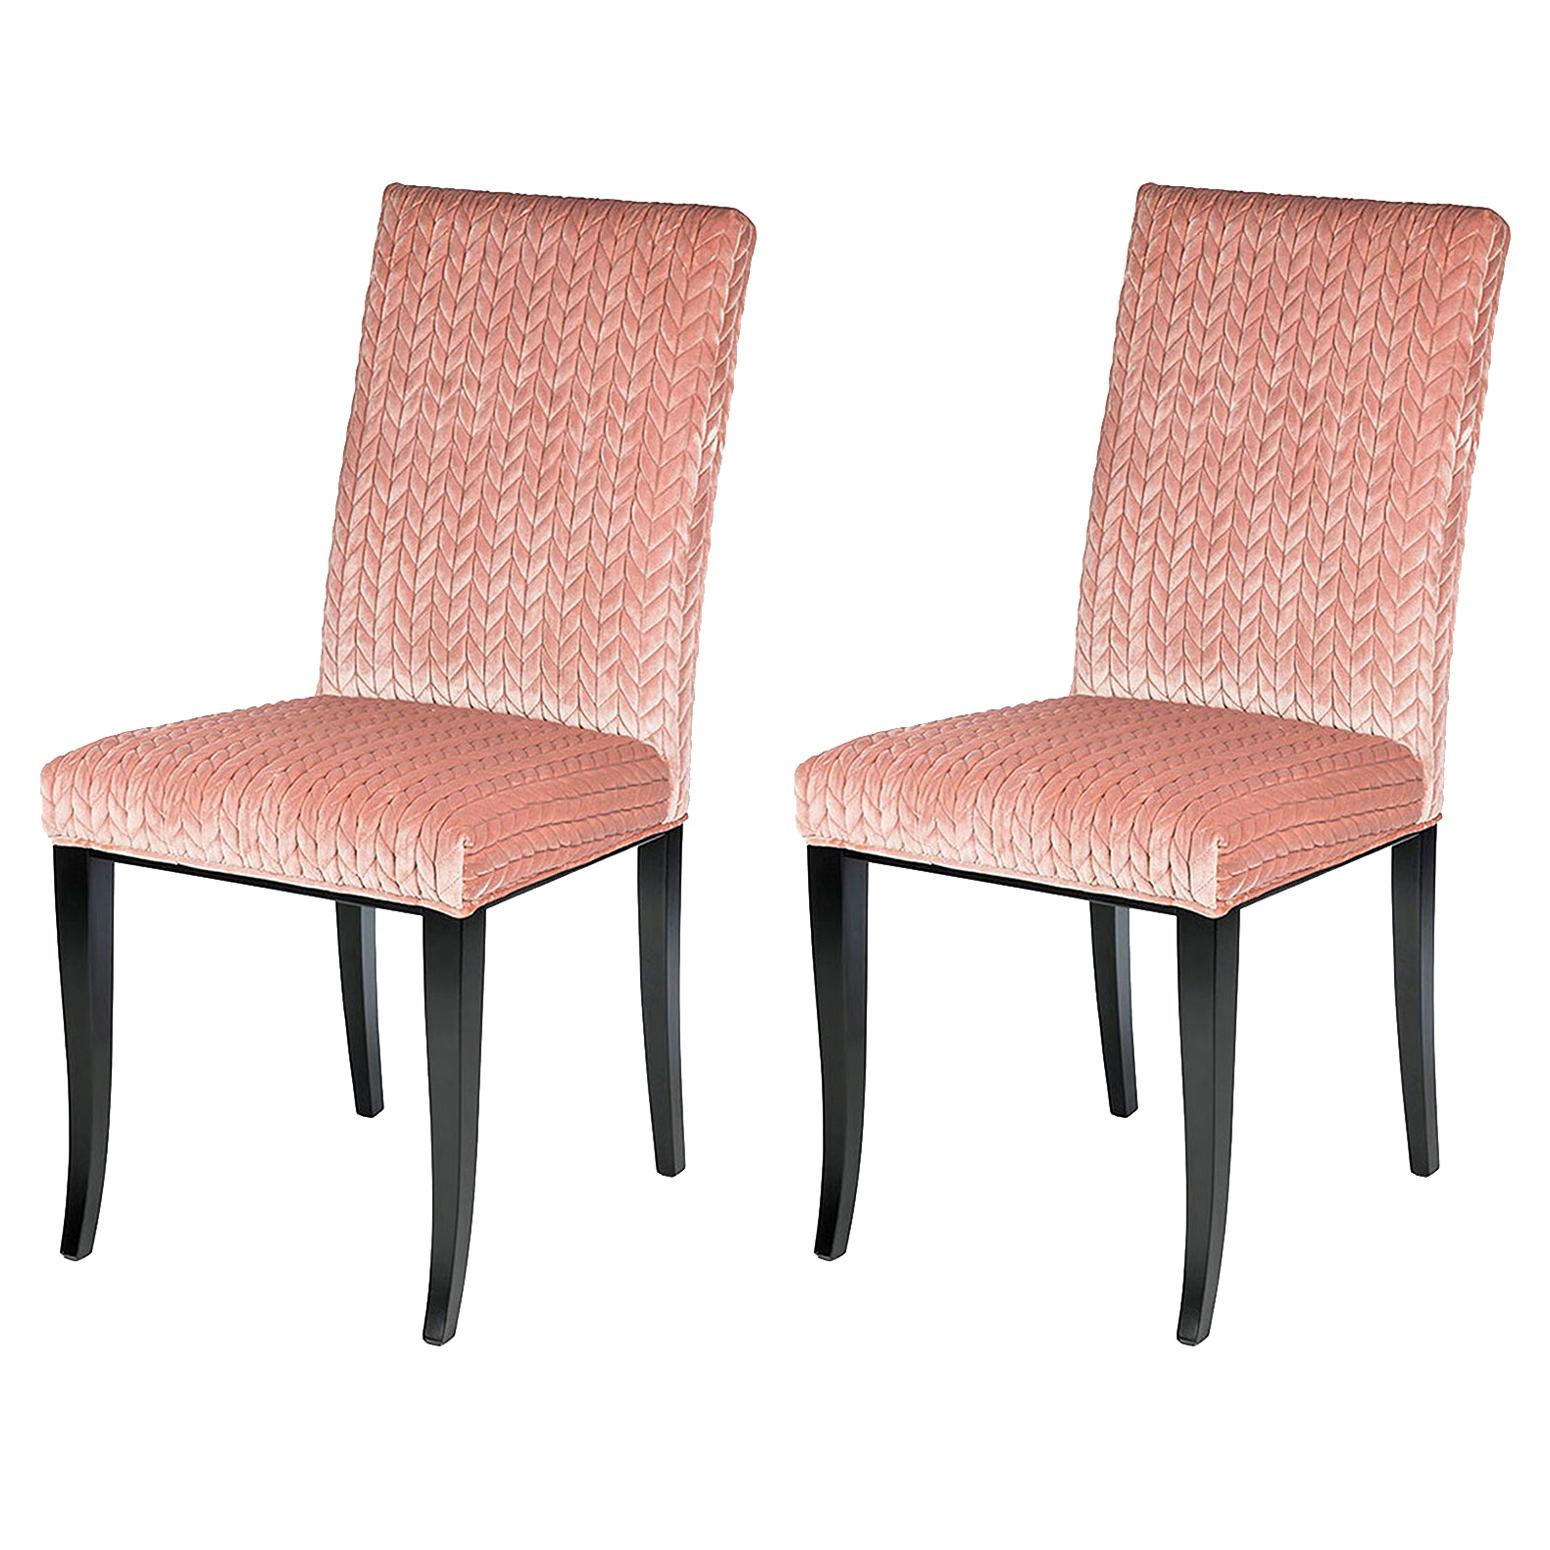 Set of Two Audrey Wood and Fabric Chairs